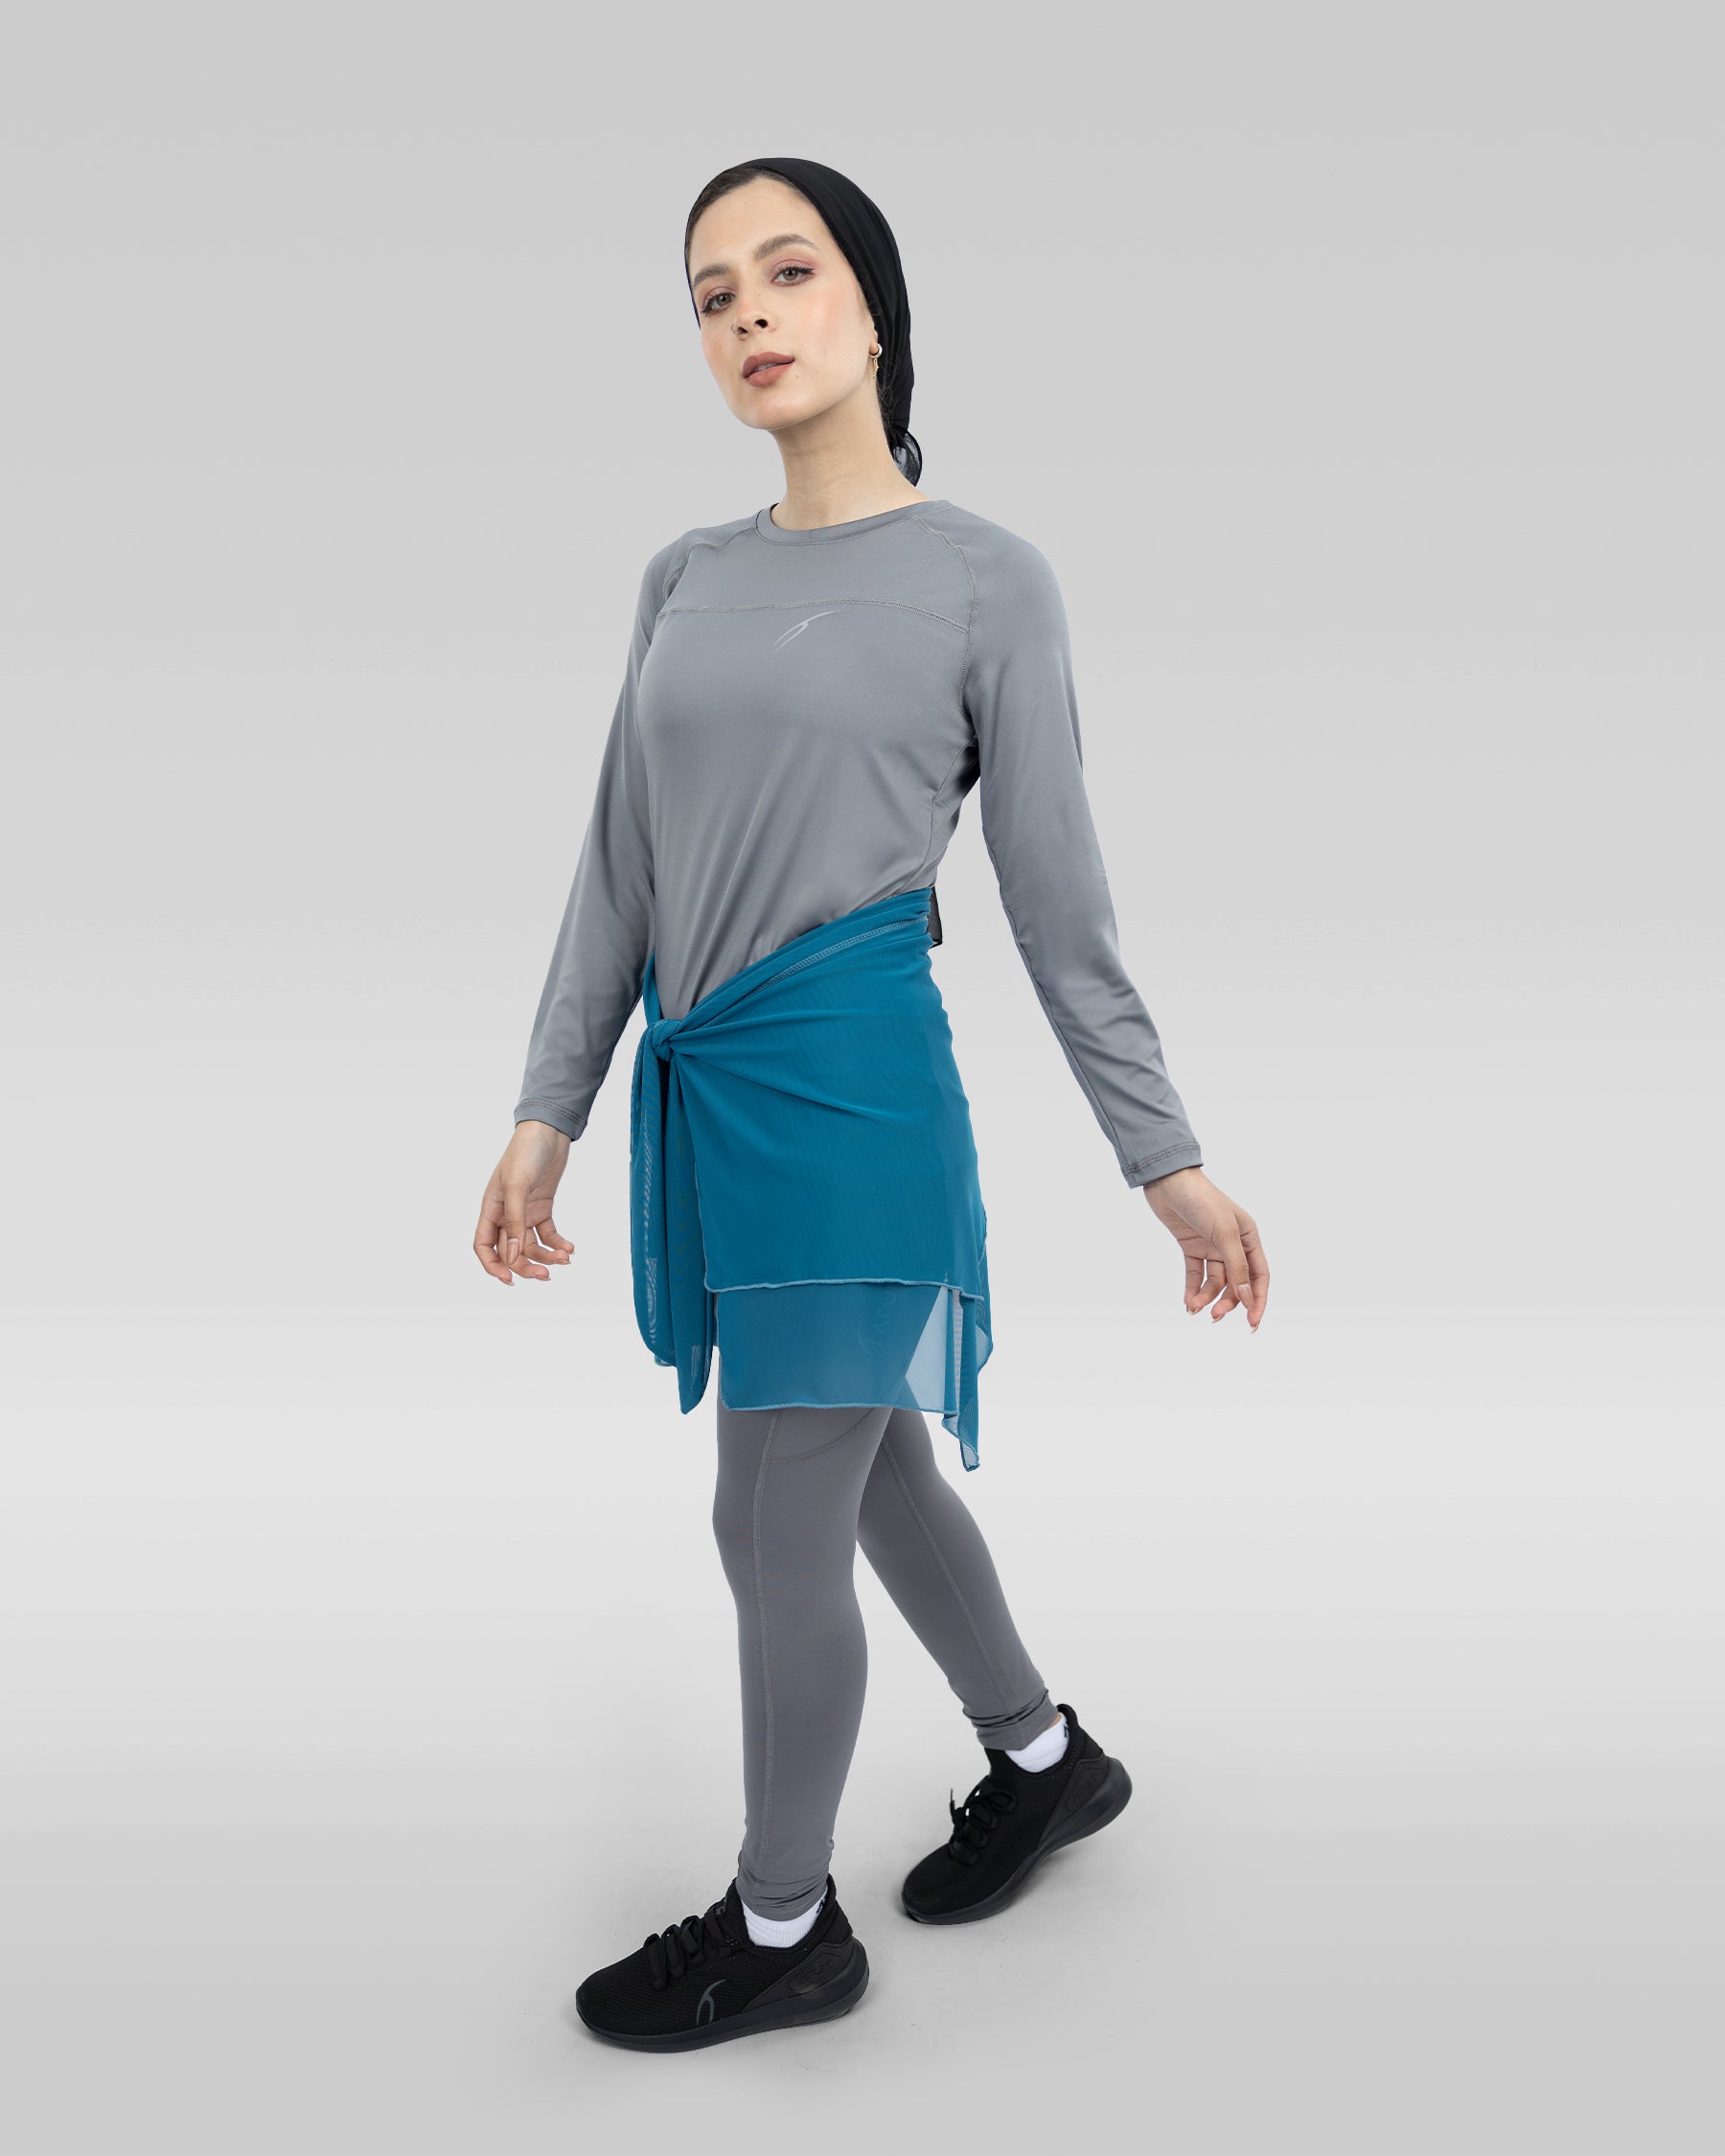 The image features a woman dressed in a gray and blue outfit, standing in a white room. She is wearing a gray shirt and a blue skirt, which is a combination of a dress and a skirt.